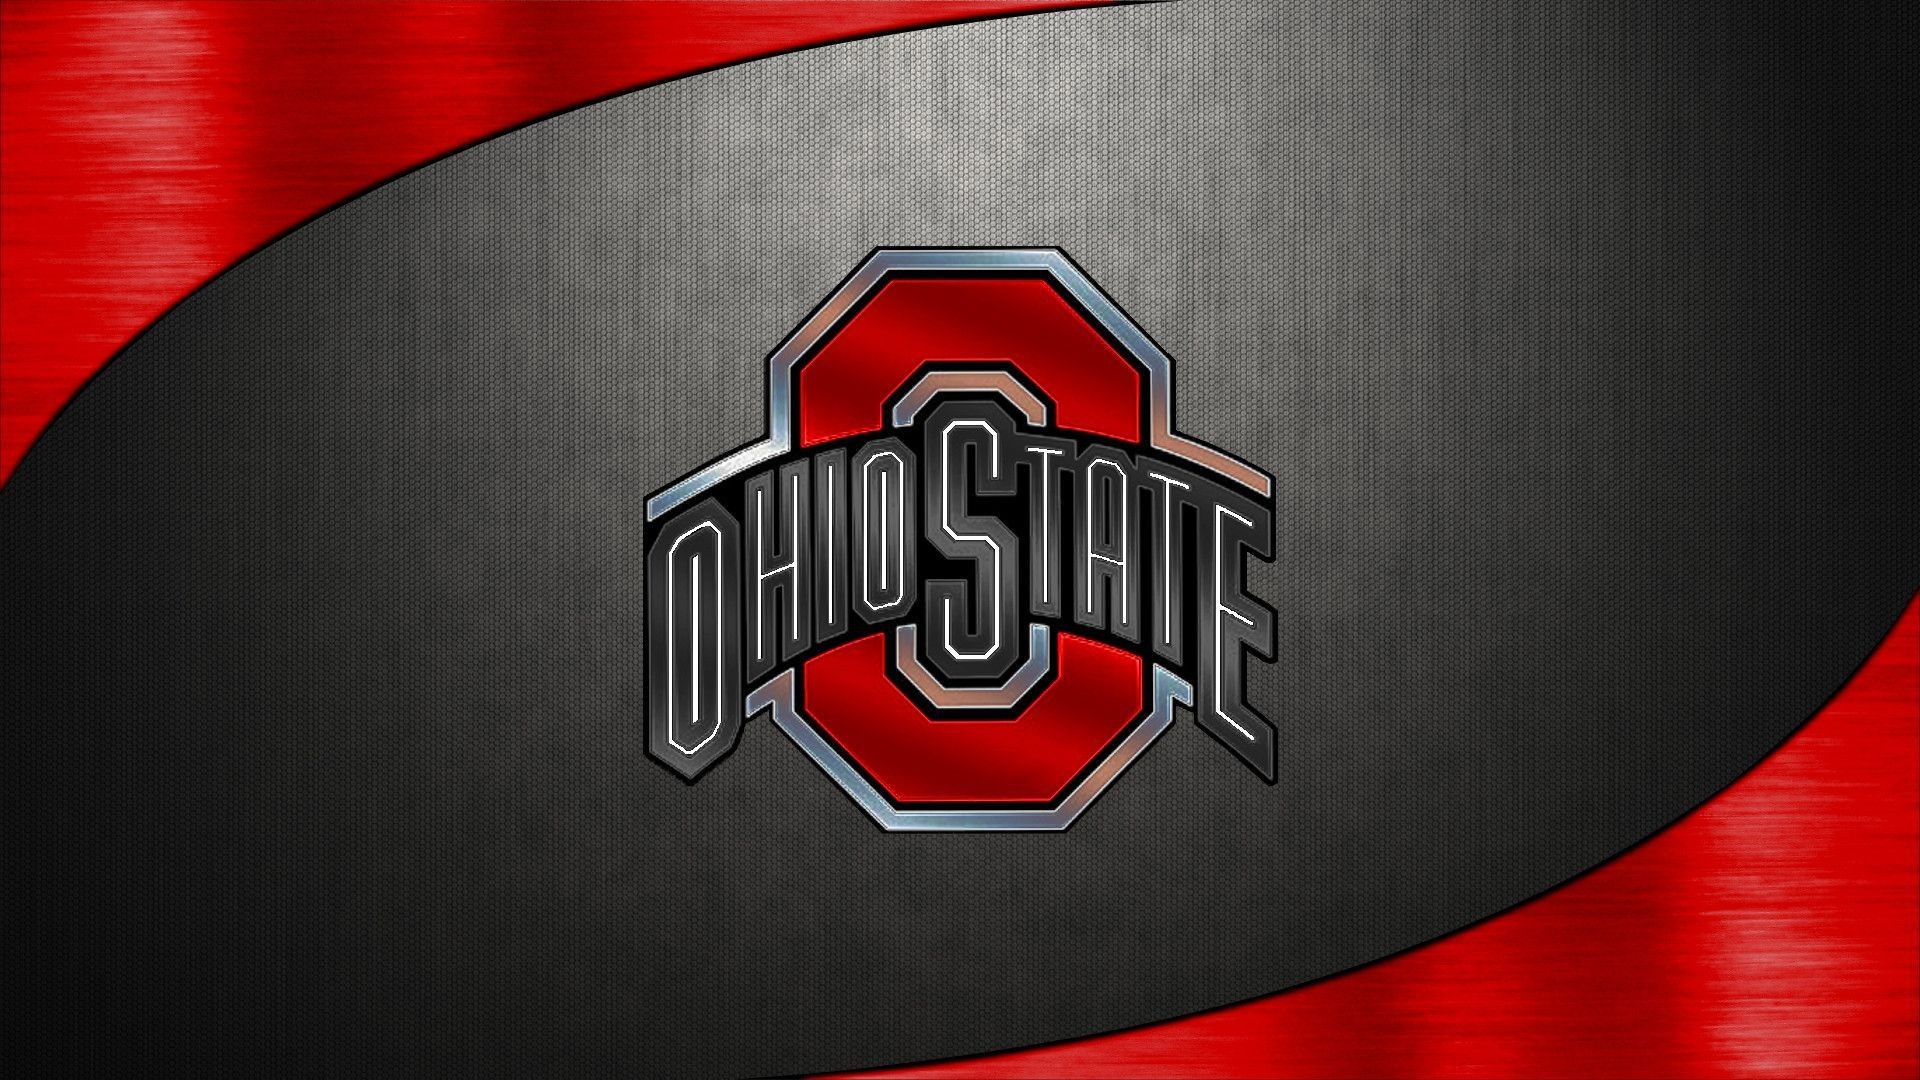 1920x1080 Ohio State Buckeyes Football Backgrounds Download | HD Wallpapers |  Pinterest | Ohio, State university and Wallpaper